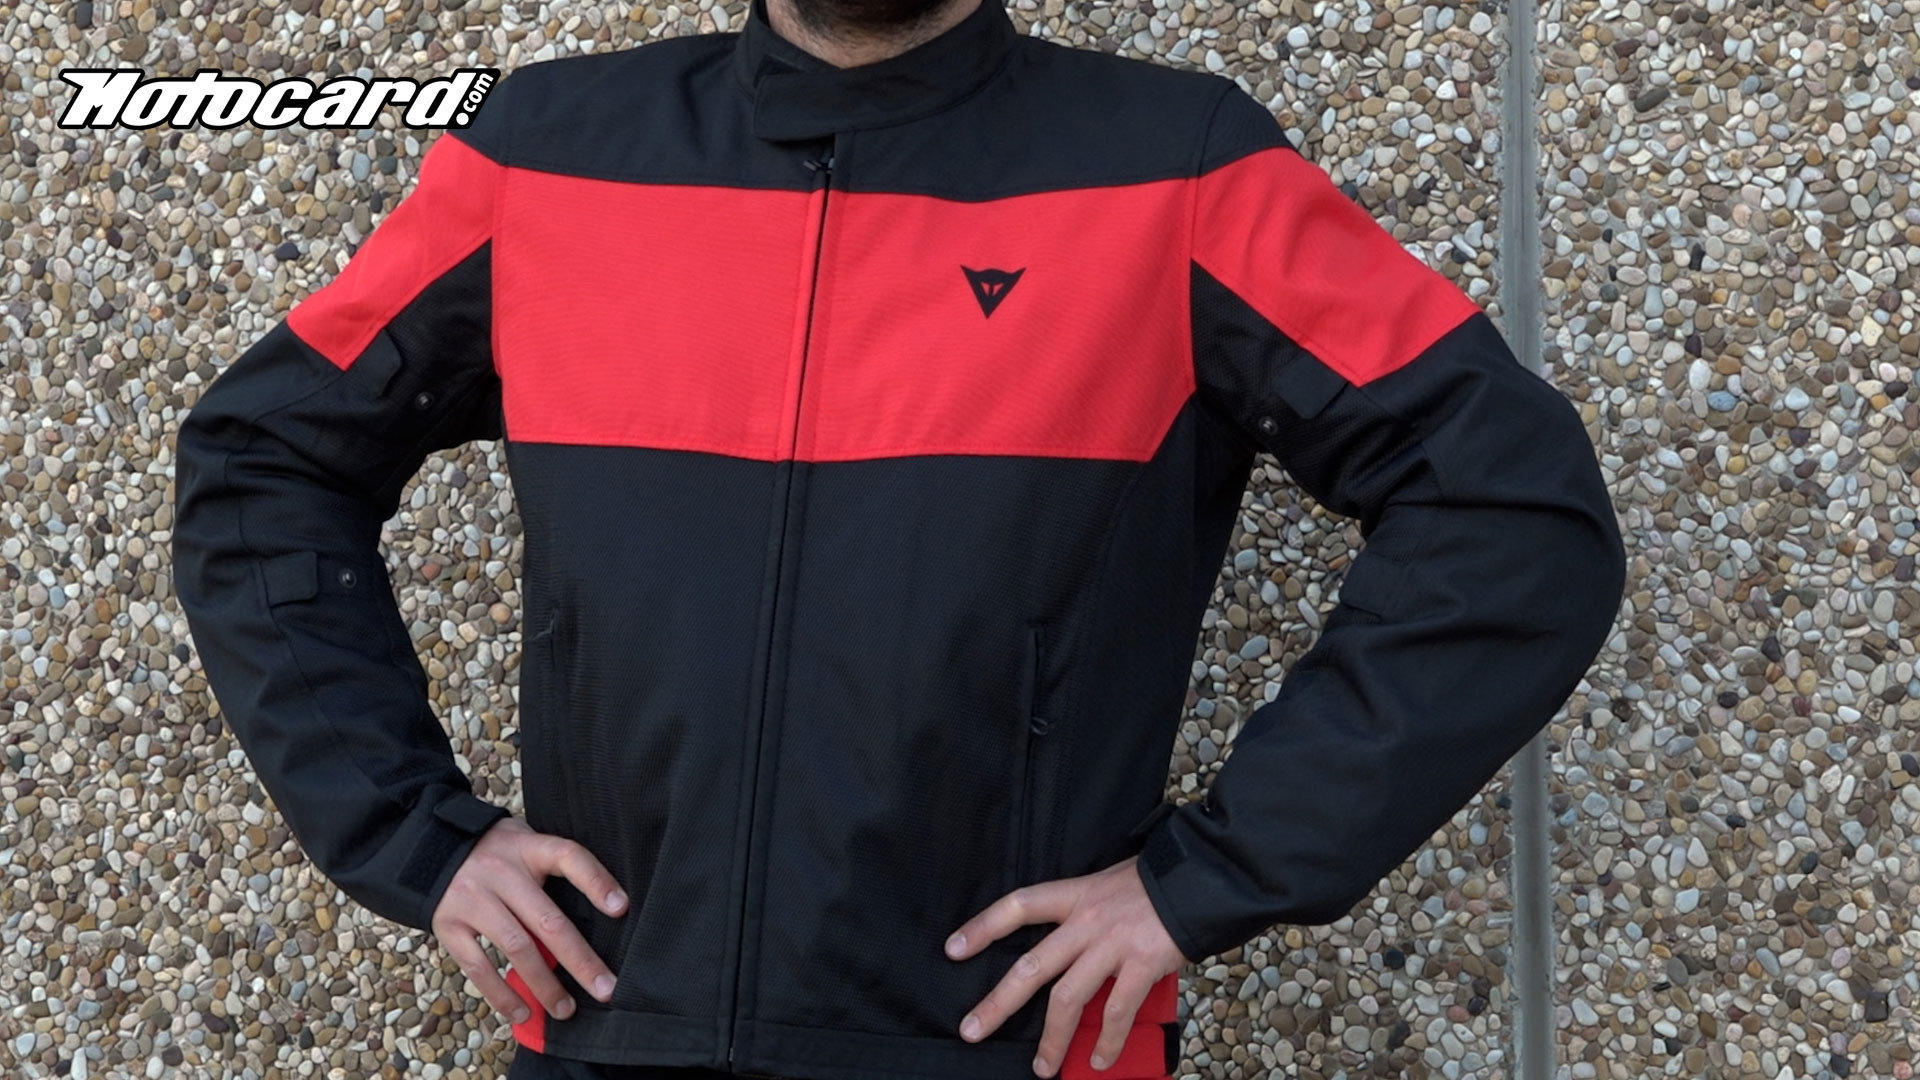 Dainese Elettrica Air Tex, a summer jacket with removable thermal